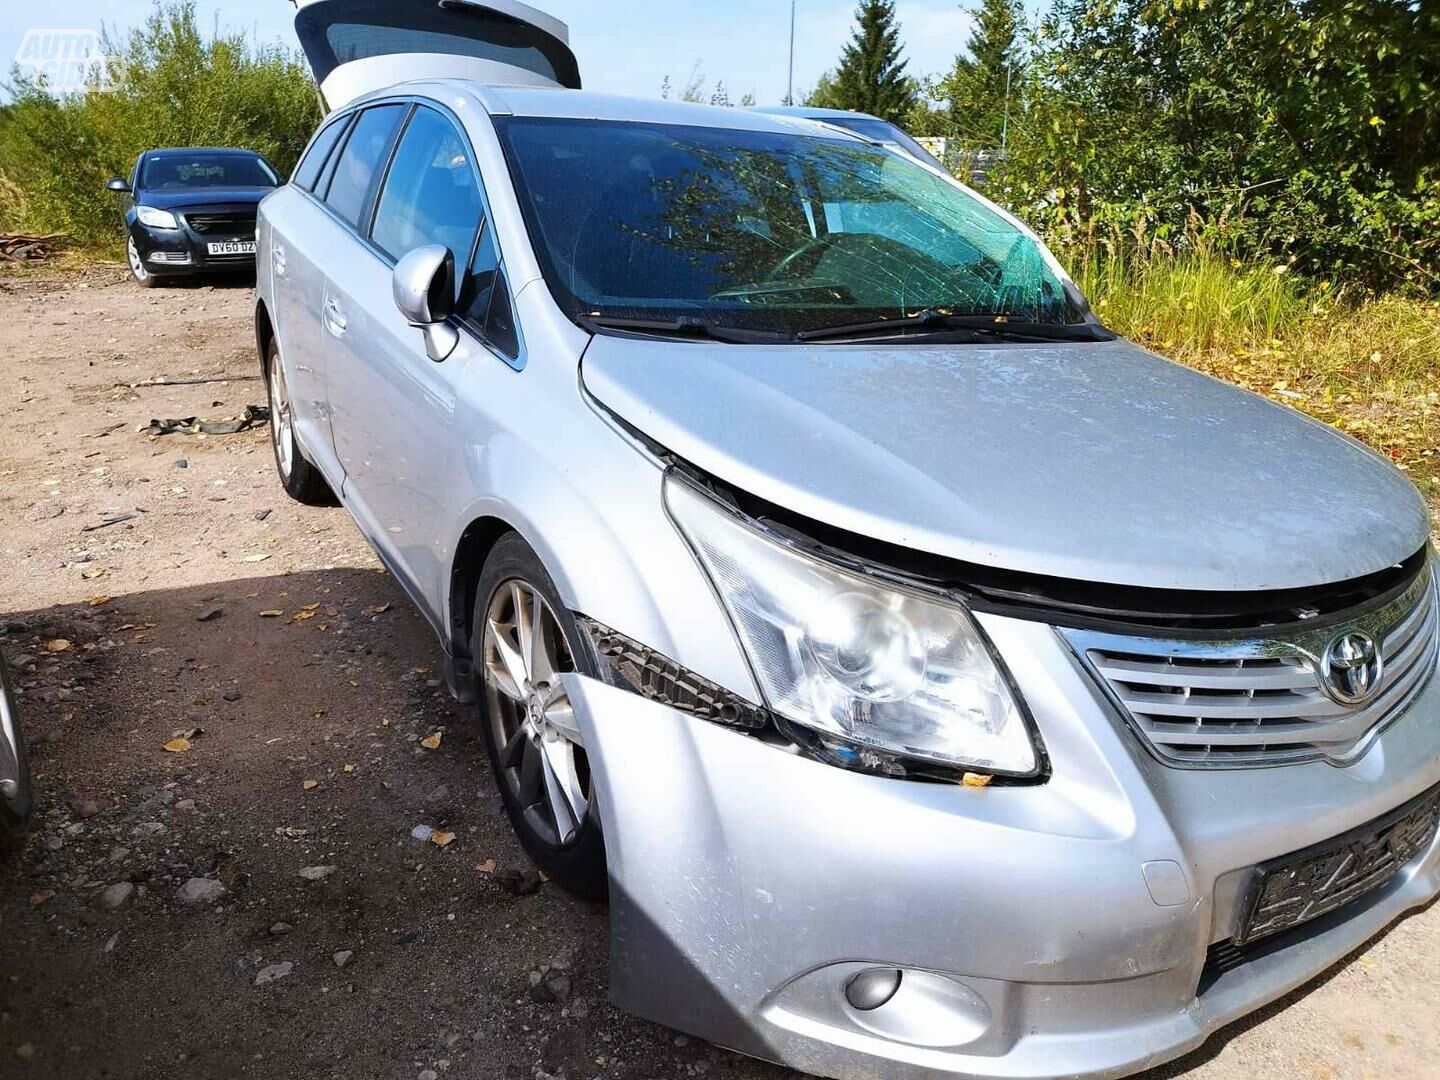 Toyota Avensis 2011 y parts